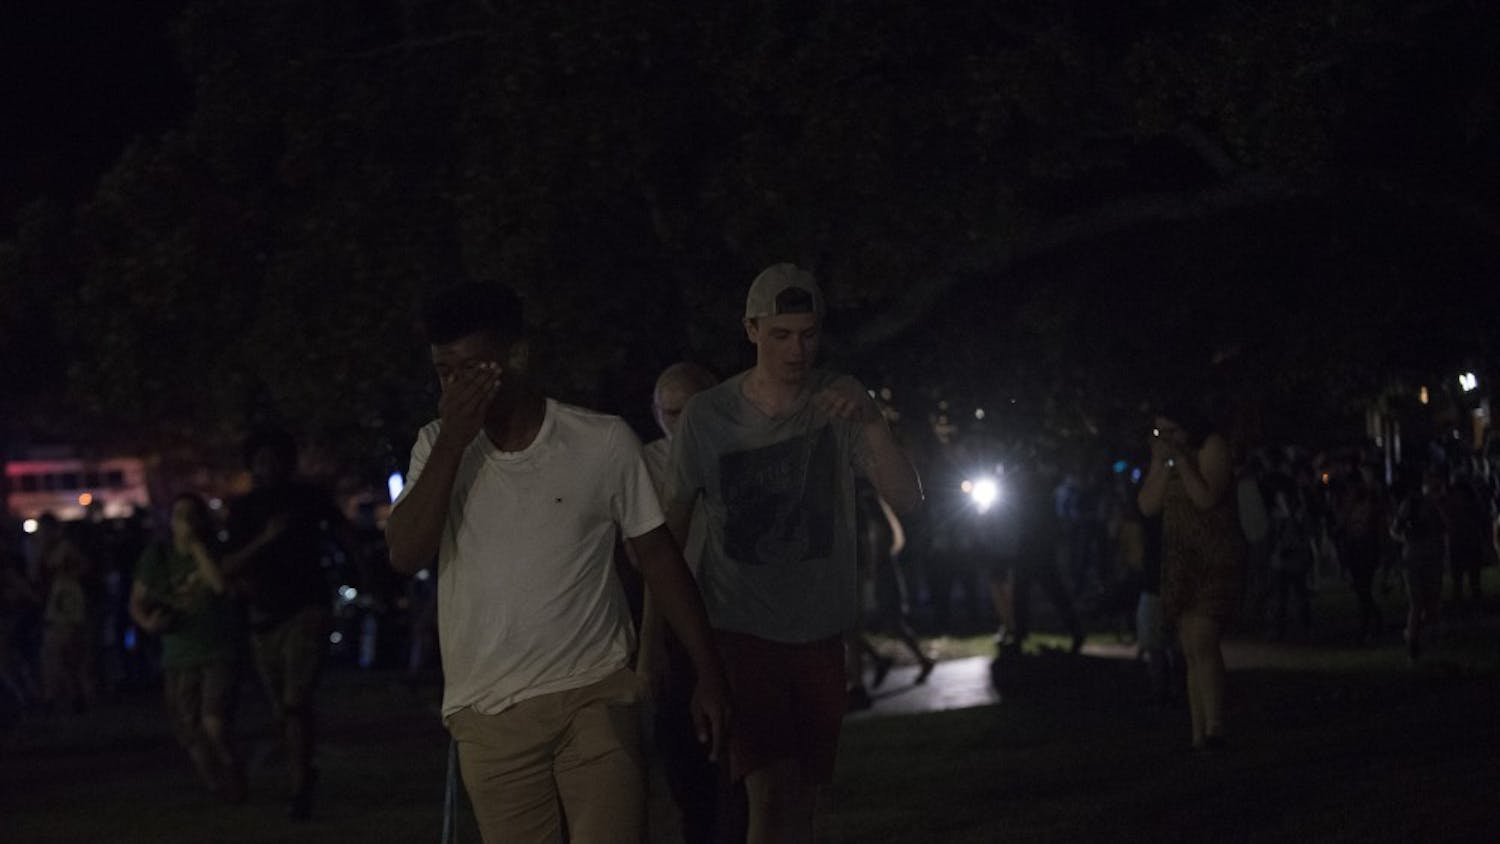 During Silent Sam twilight service and dance party, police use a pepper fogger. 